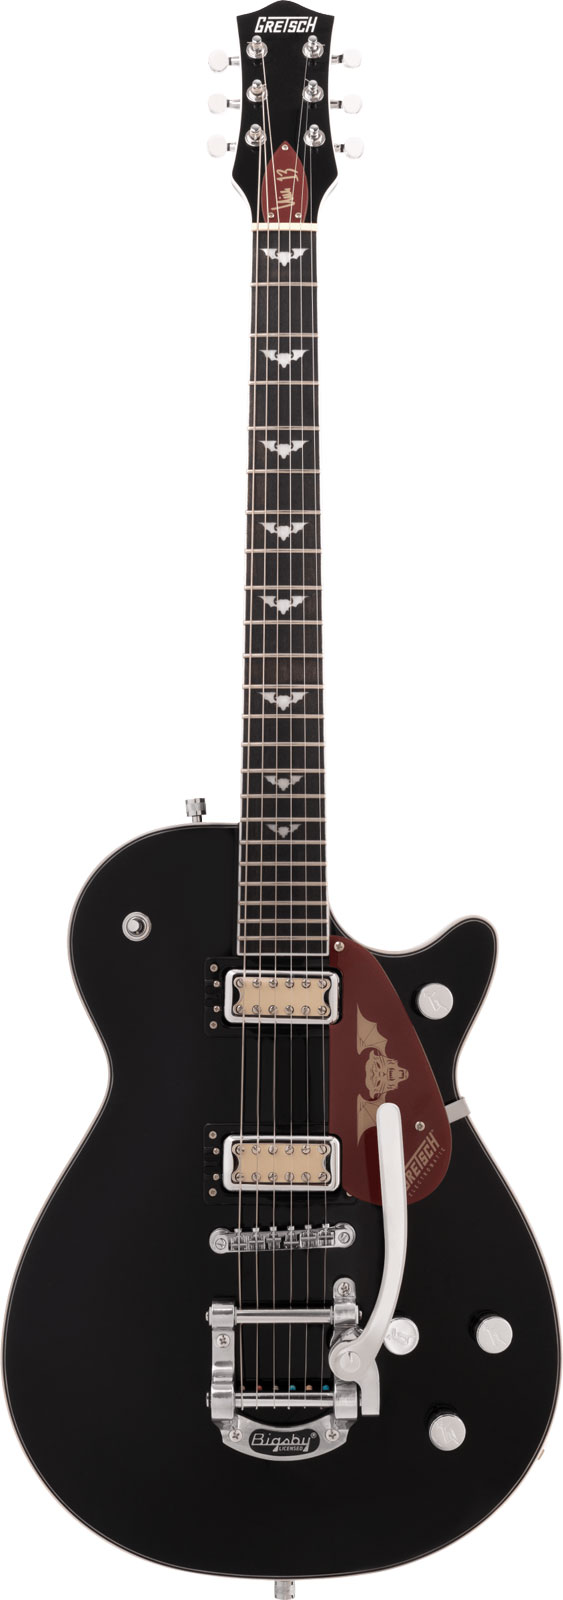 GRETSCH GUITARS G5230T NICK 13 SIGNATURE ELECTROMATIC TIGER JET WITH BIGSBY LRL, BLACK